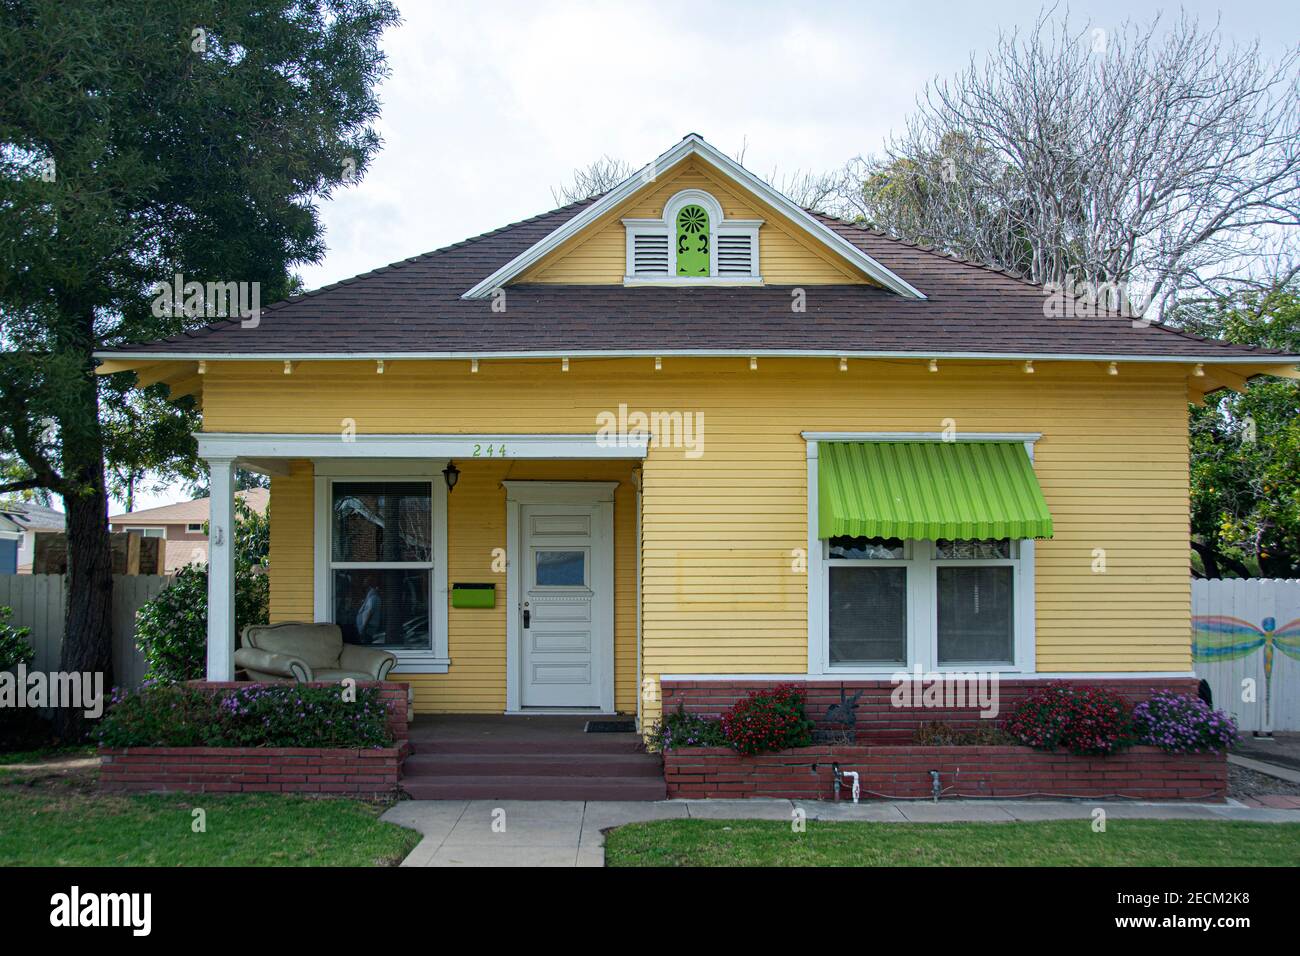 An example of the Cottage/Bungalow architectural style, Orange, California, USA Stock Photo